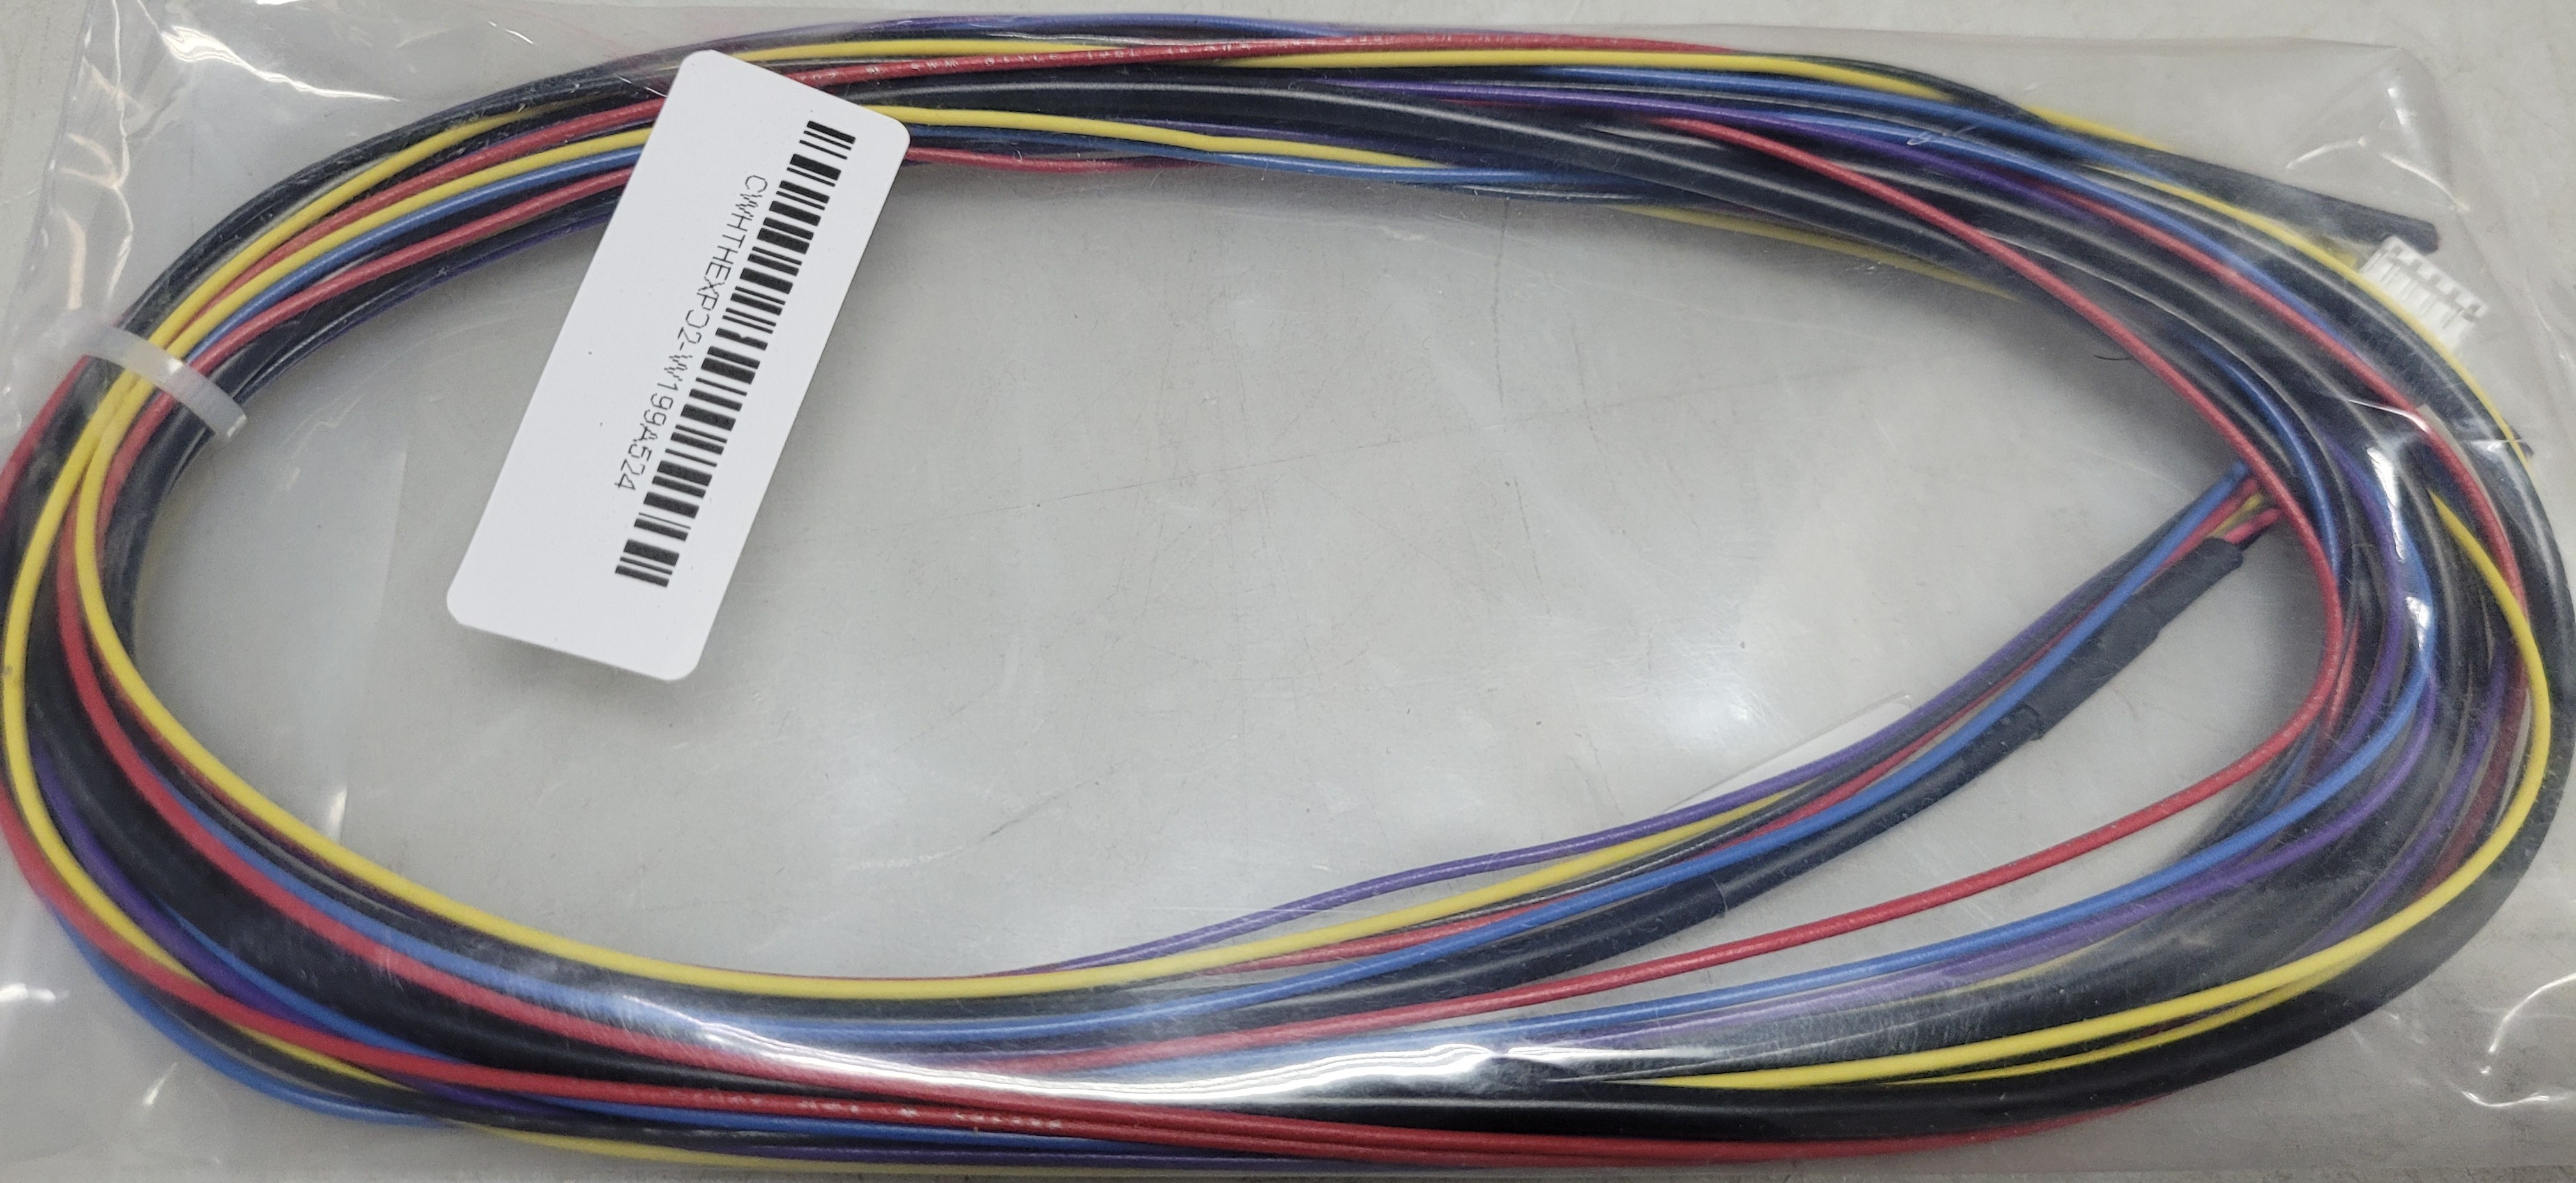 orion thermistor expansion module harness image